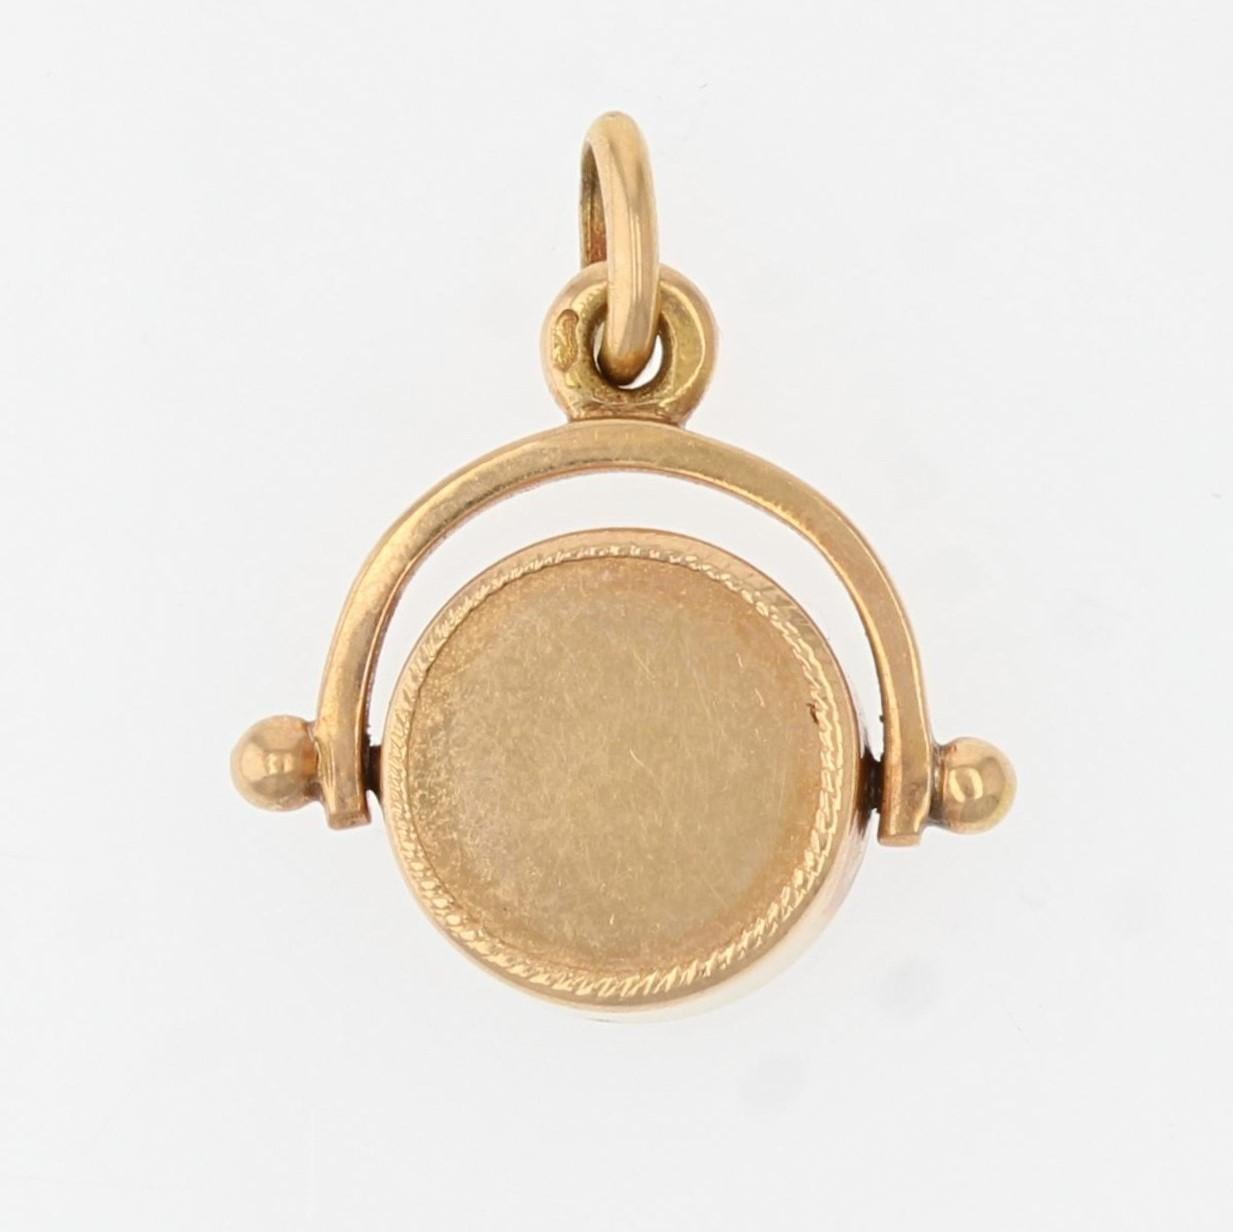 Pendant in 18 karat yellow gold, eagle head hallmark
This antique pendant is formed by a compass on a rotating bezel, the back being smooth, allowing to wear the antique charm on one side or the other.
Height : 1.9 cm, width : 15.8 mm, thickness :